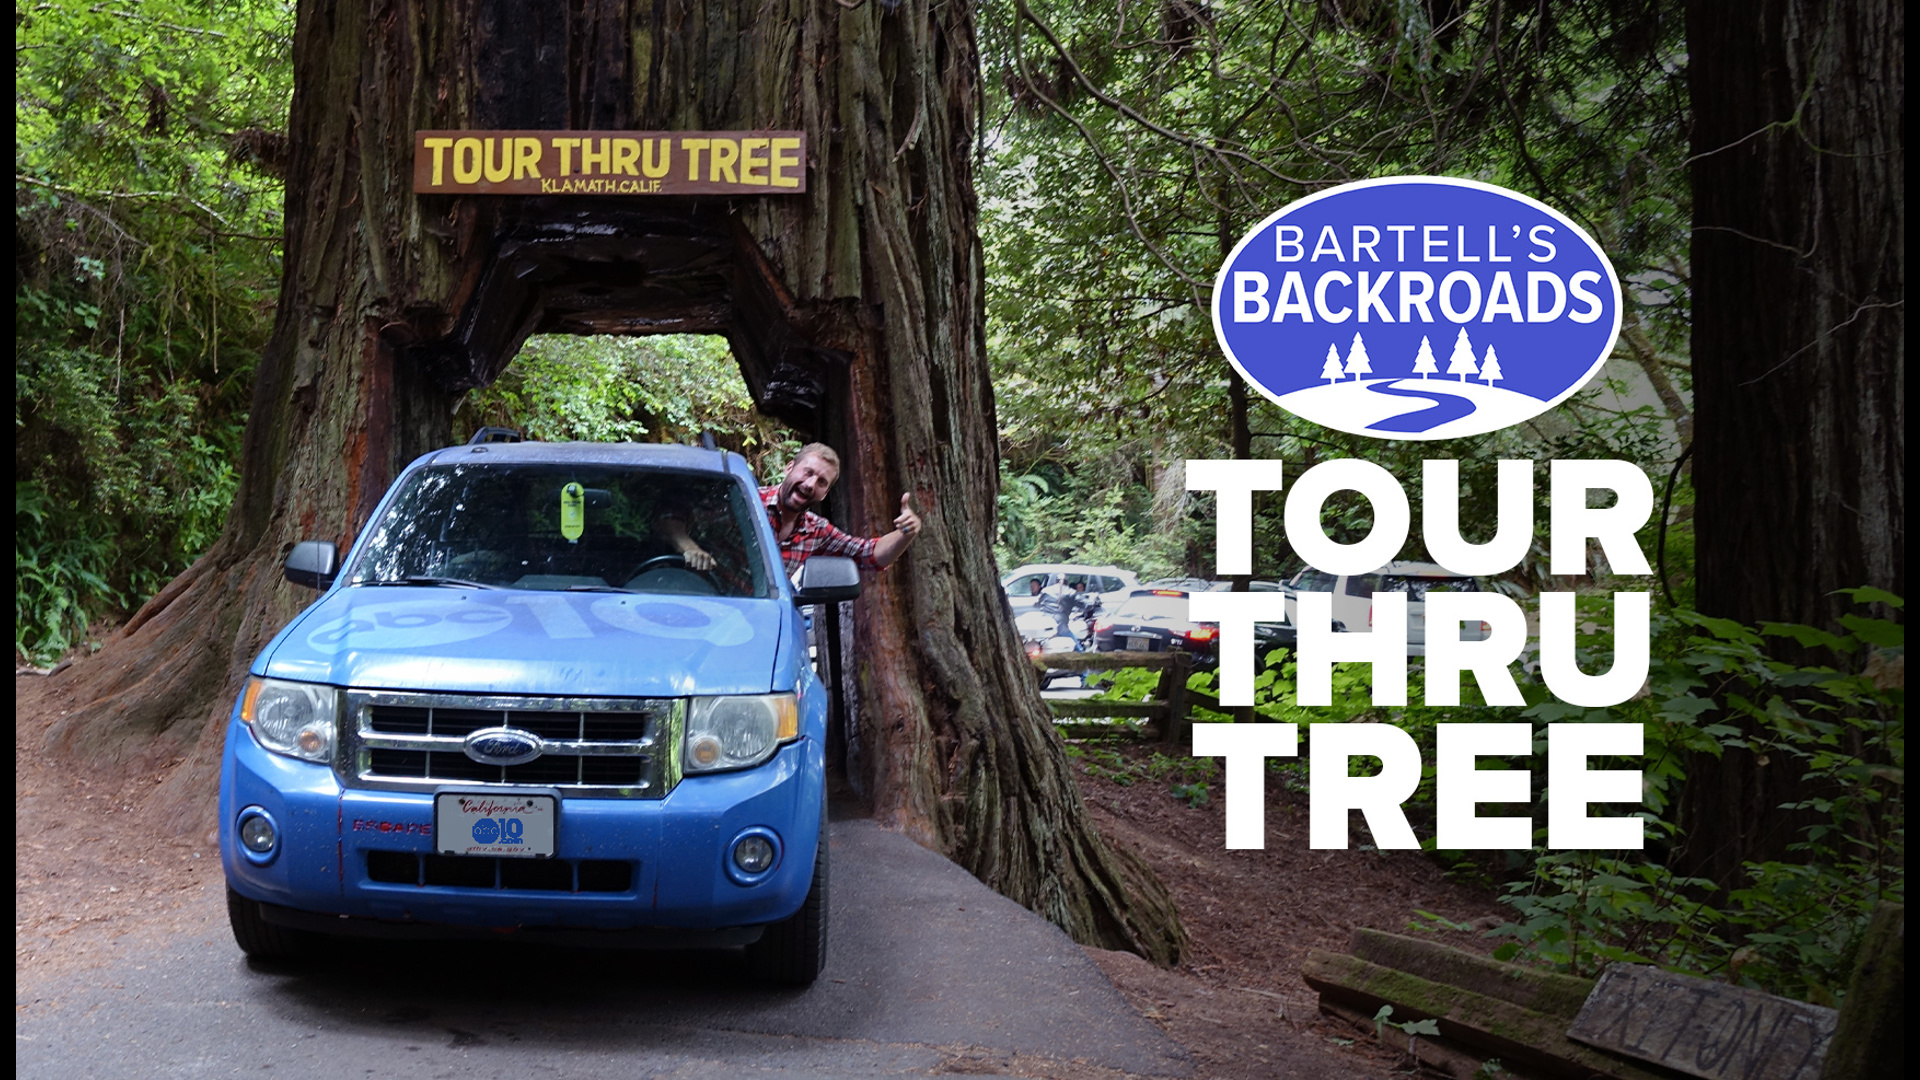 The Tour Thru Tree in Klamath, California is a tunnel carved out of a massive redwood tree stump. John Bartell makes a pit stop on the Backroads.